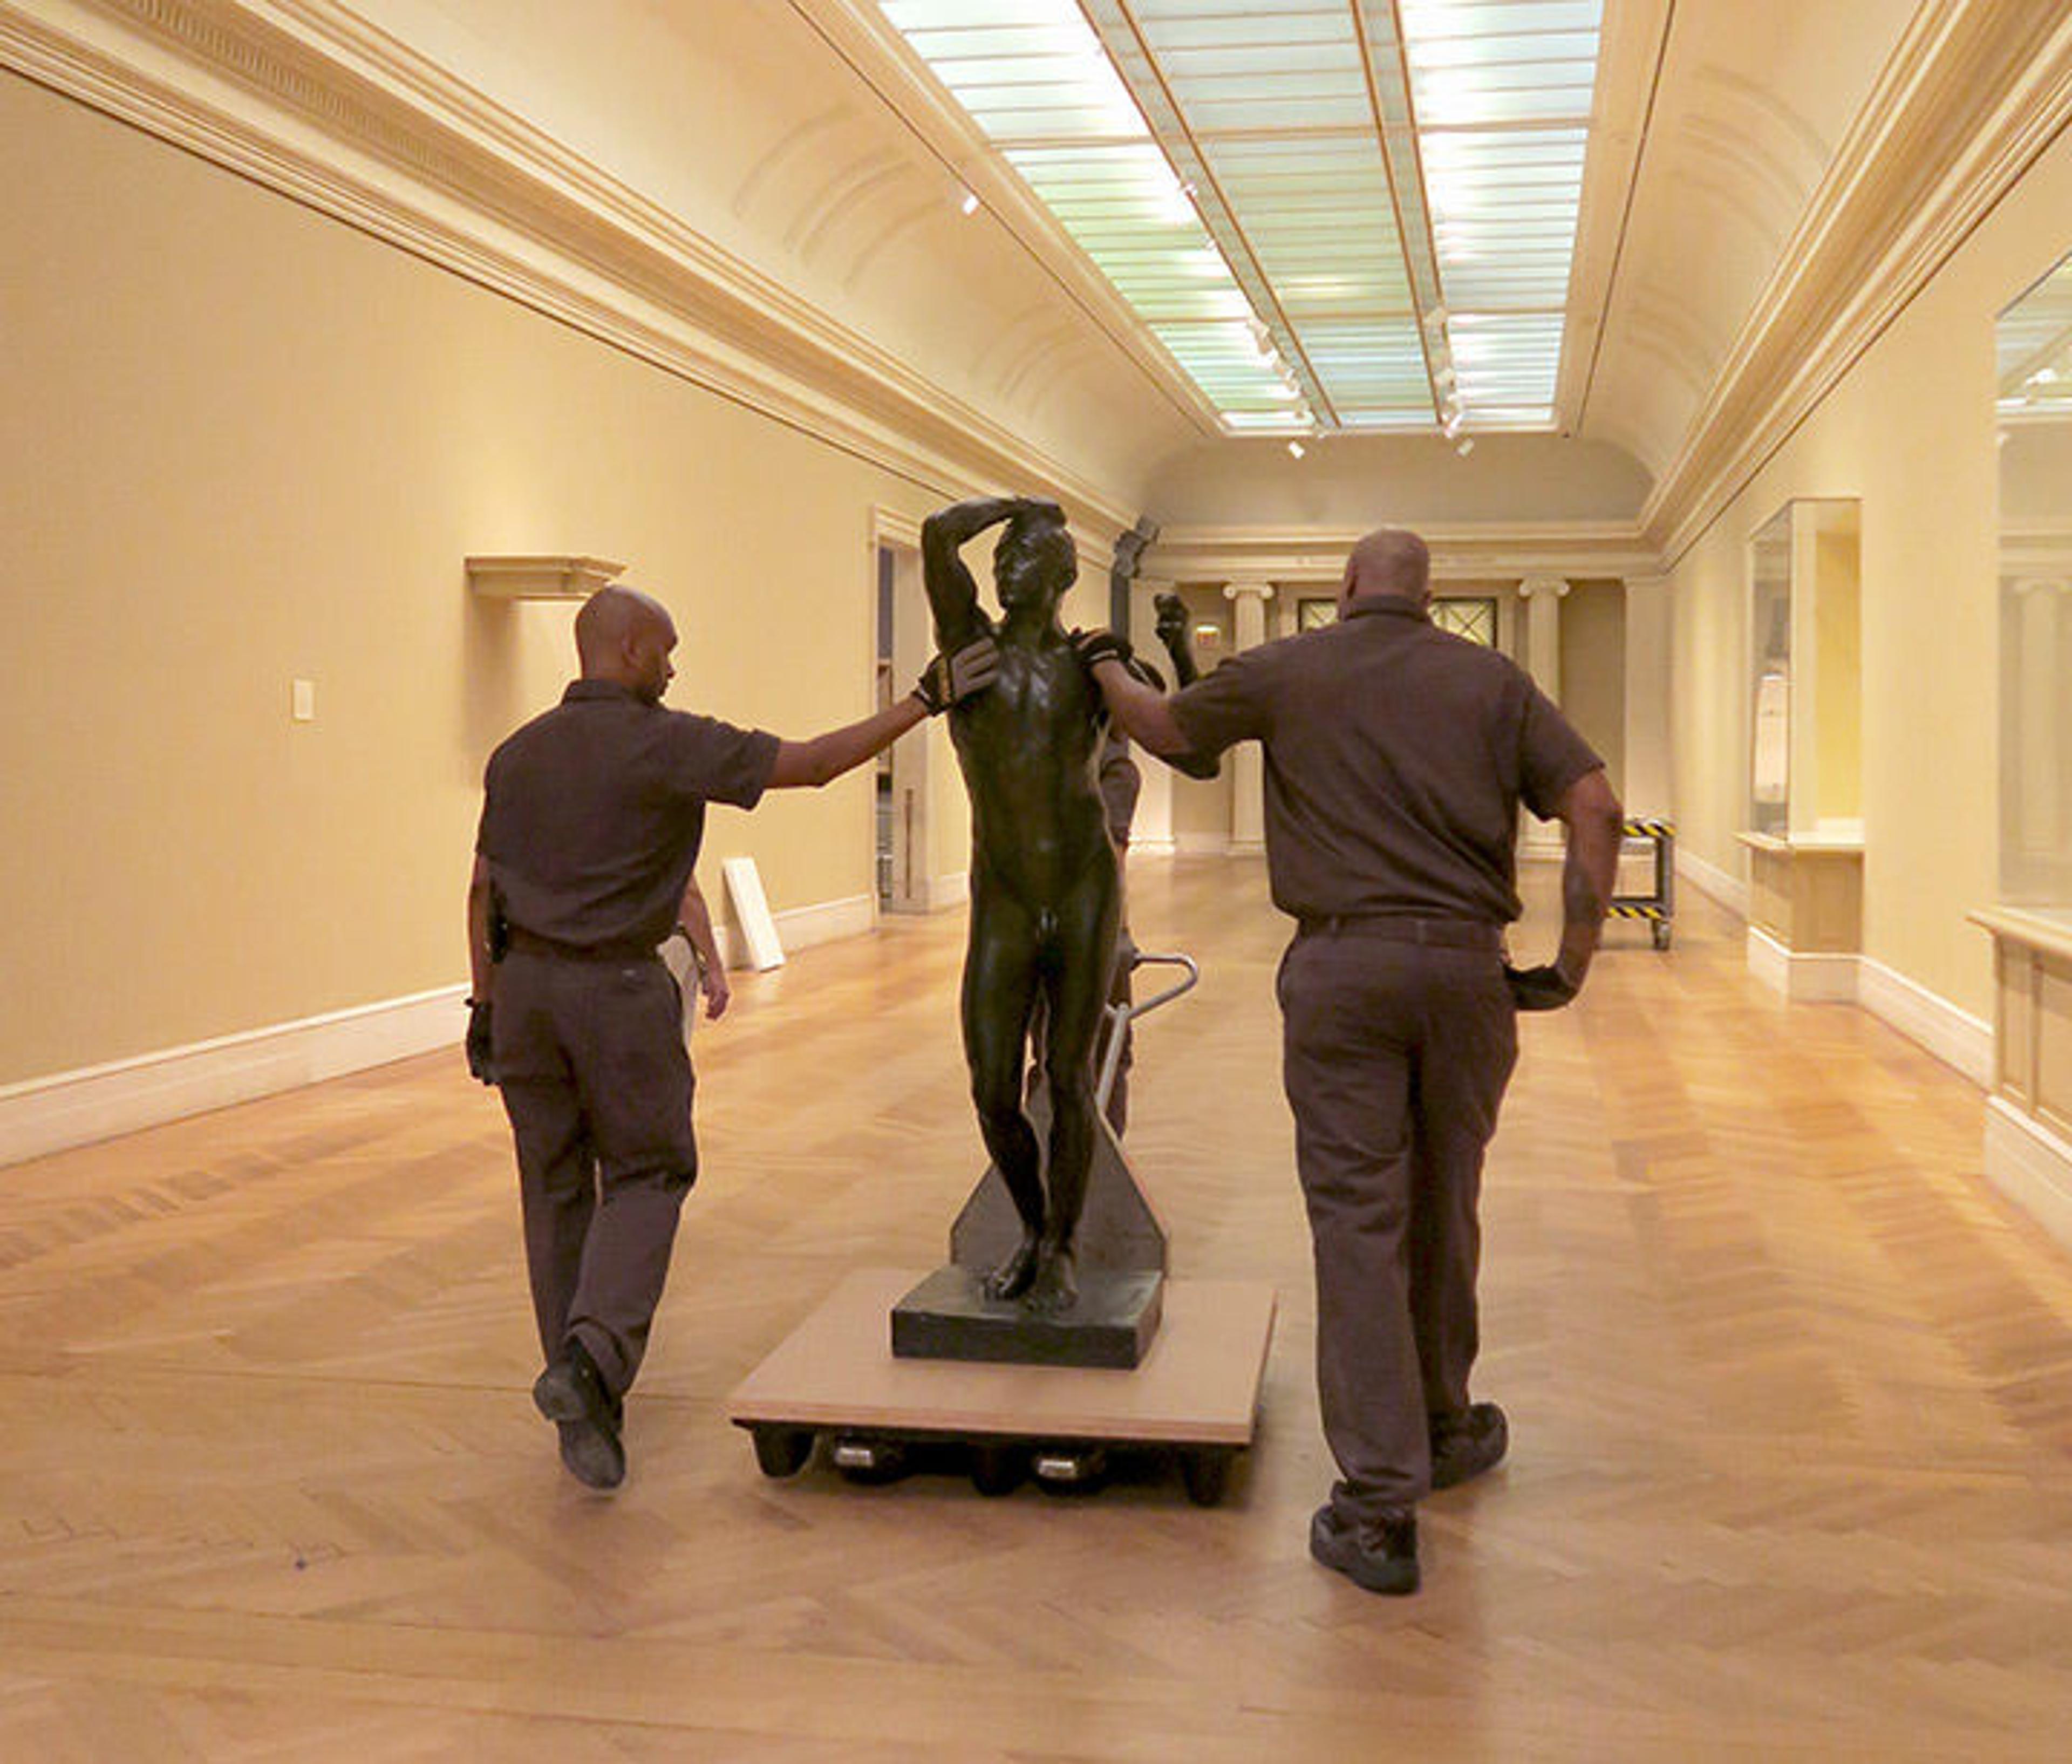 The Age of Bronze making its exit with Museum riggers (responsible for moving large-scale artworks) Lionel Carre (left) and Derrick Williams (right).